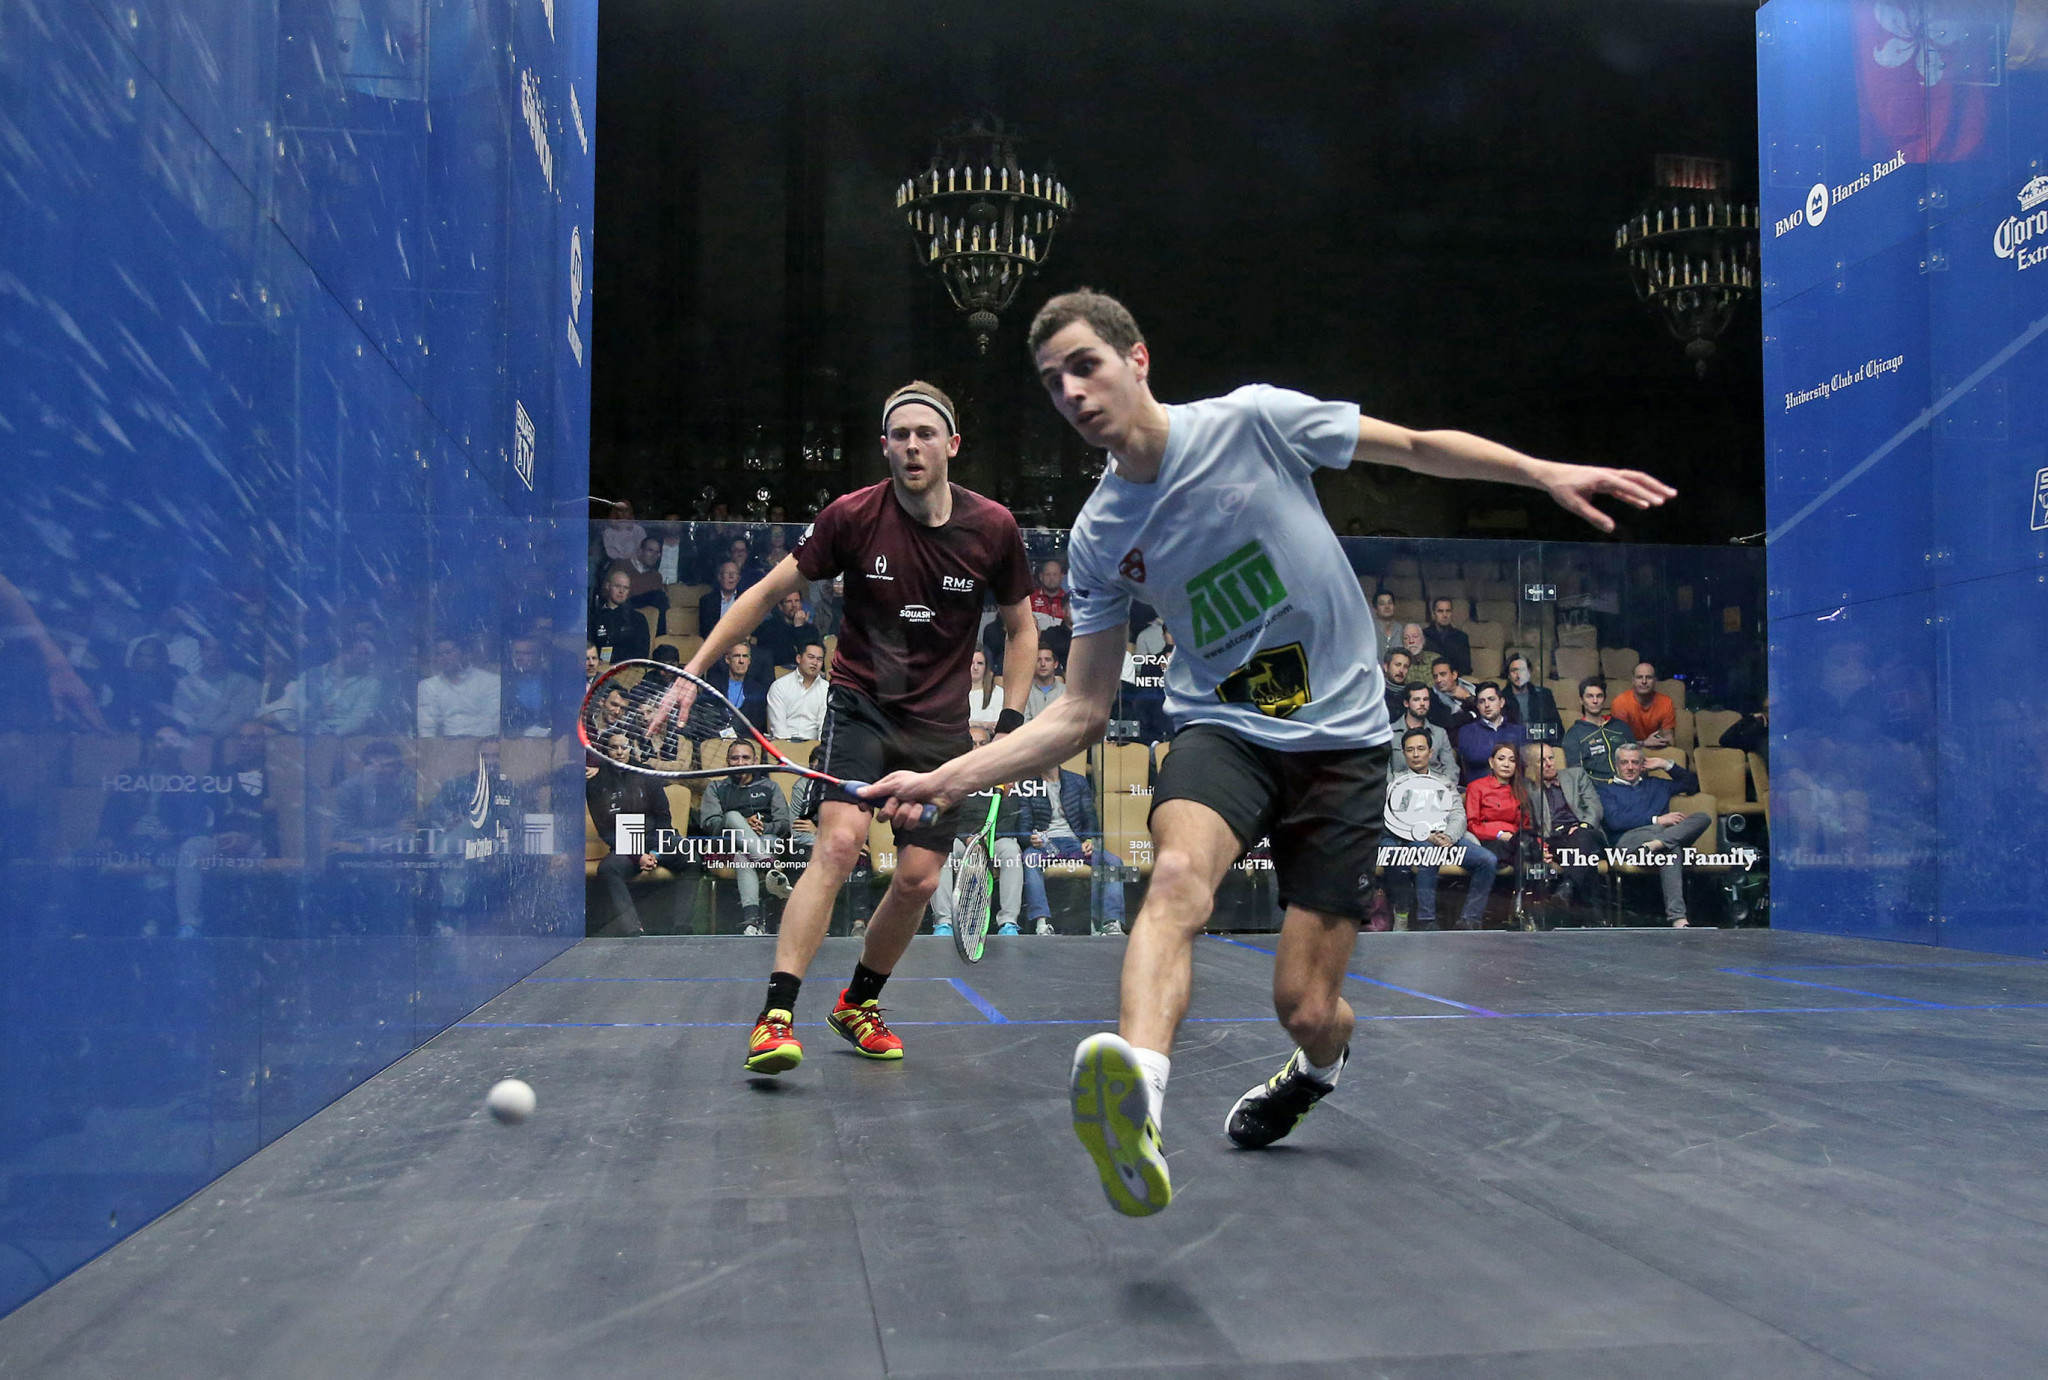 Egypt's Ali Farag, the highest seeded player left in the Windy City Open, is due to face Nick Matthew's conqueror Cameron Pilley in the quarter-final after beating another Australian, Ryan Cuskelly, in the previous round ©PSA